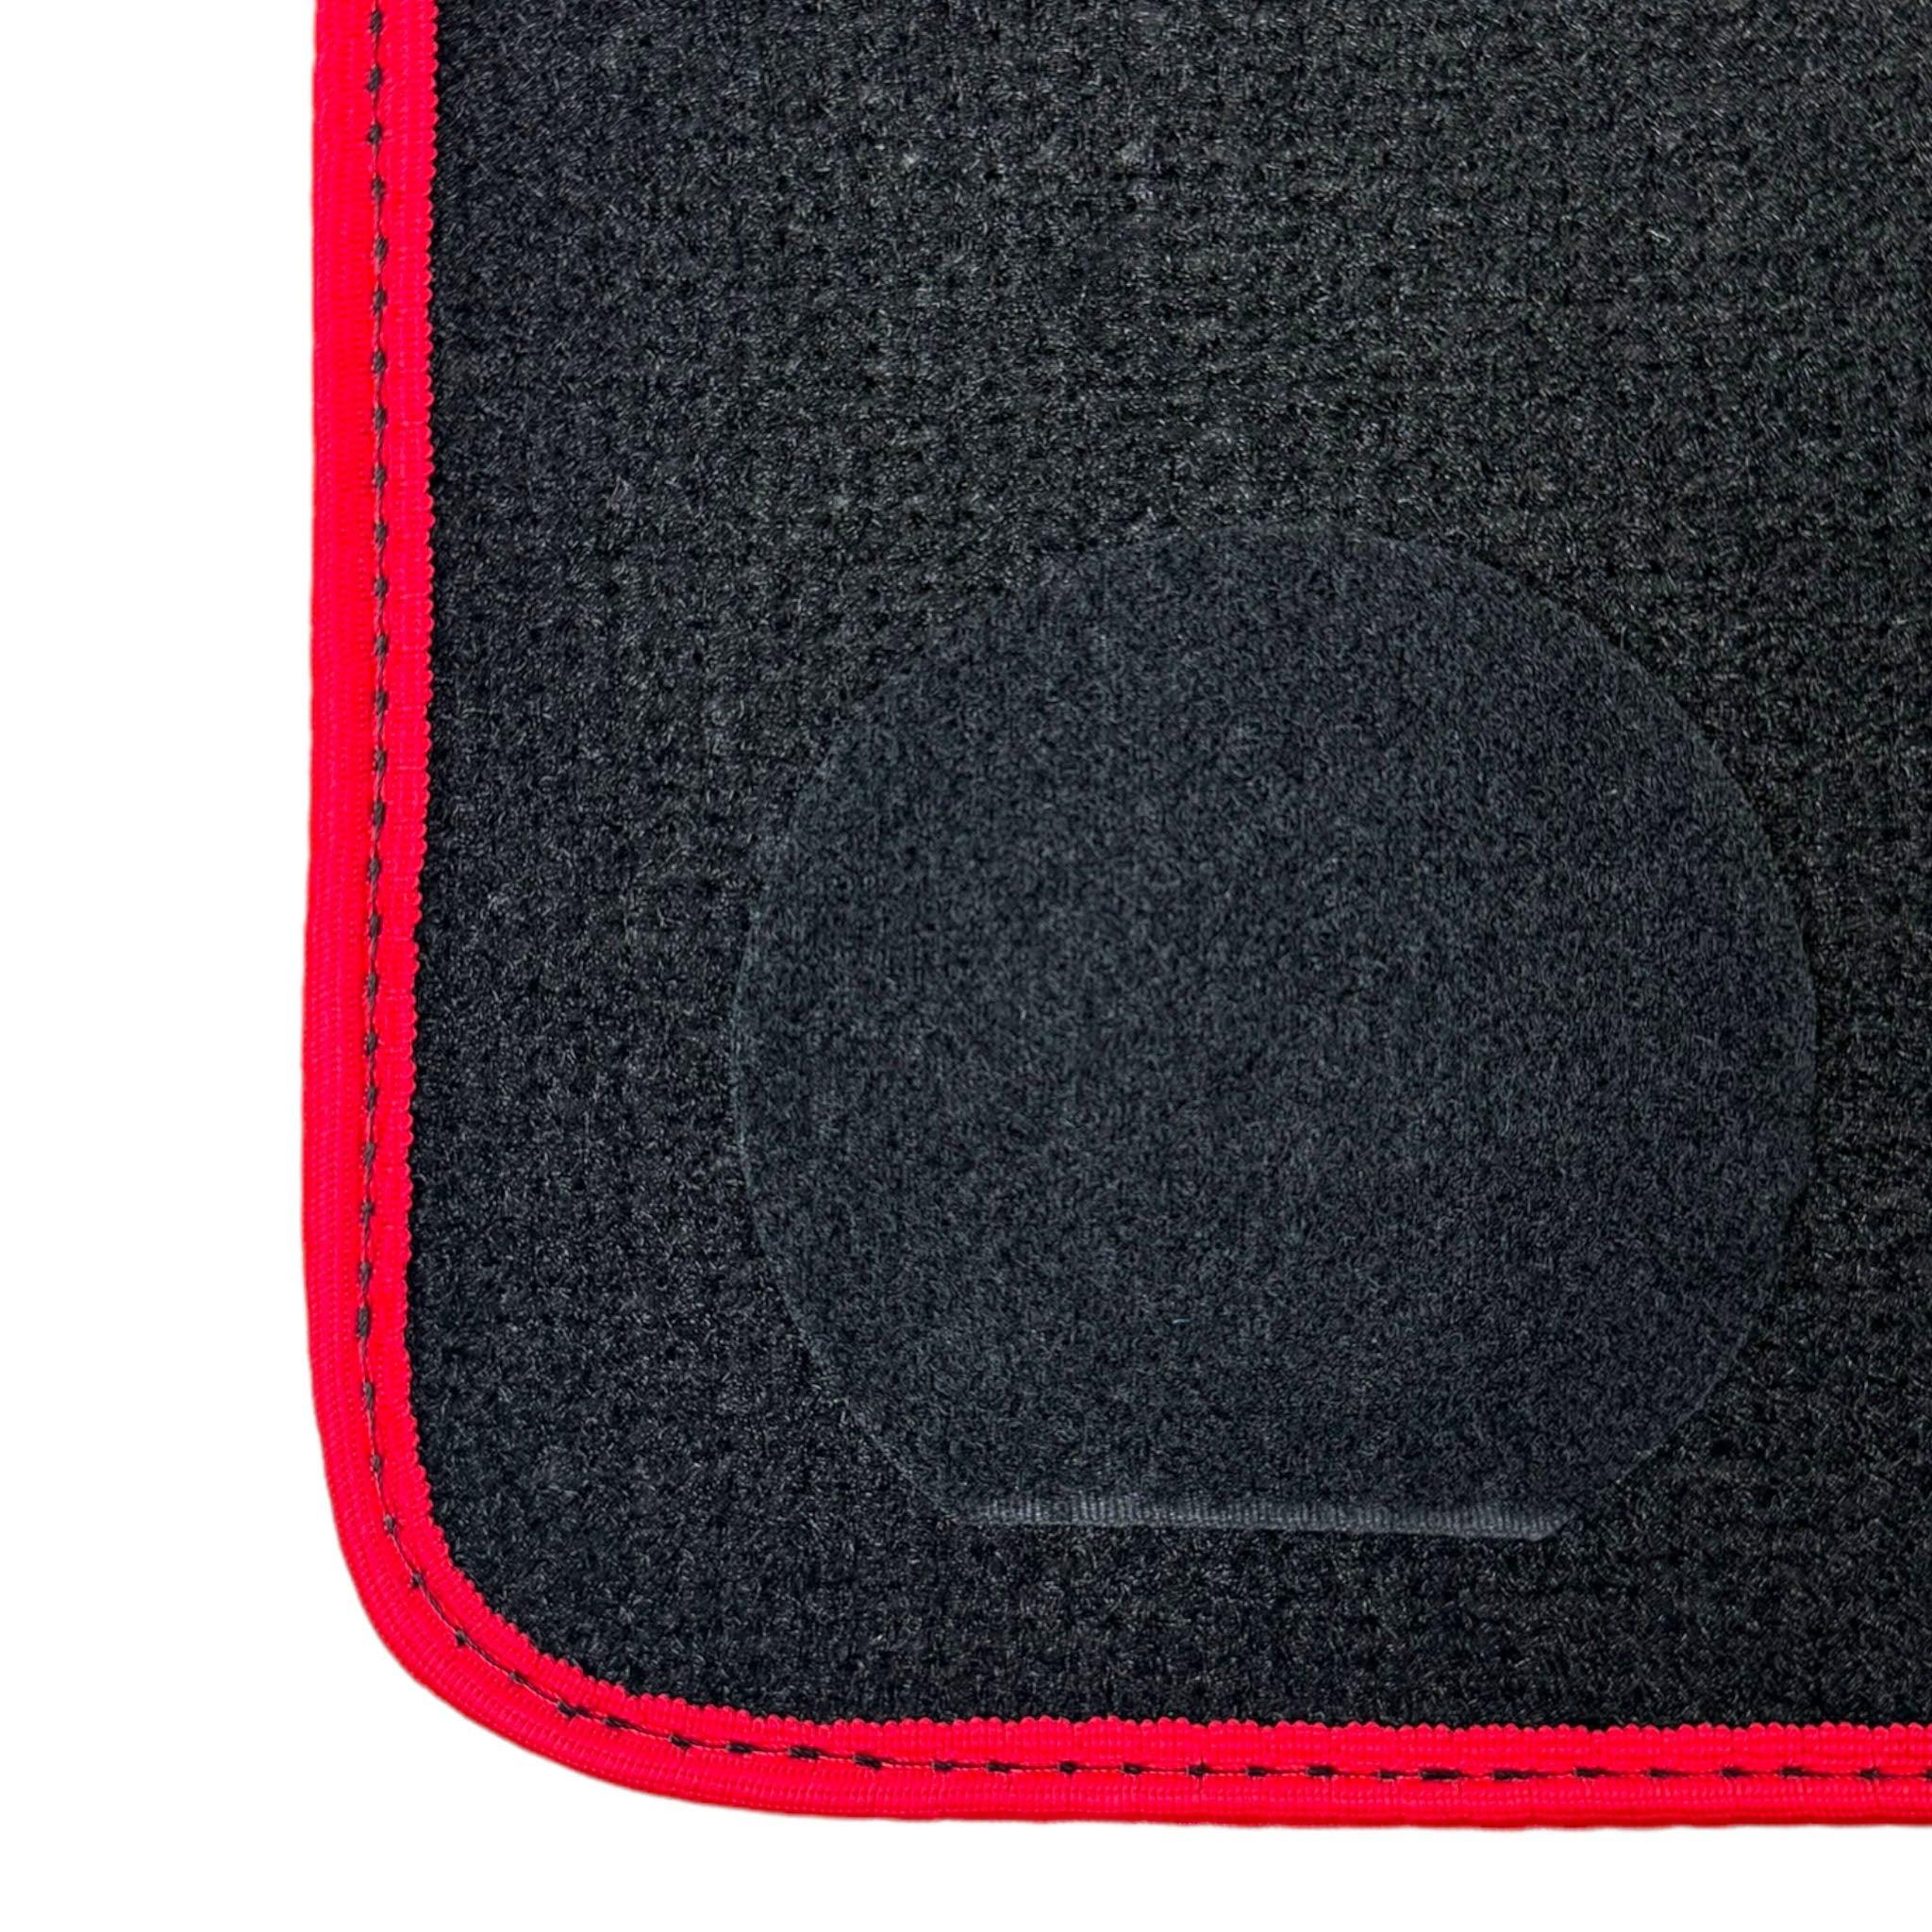 Black Floor Floor Mats For BMW M8 Series Convertible F91 | Fighter Jet Edition AutoWin Brand |Red Trim